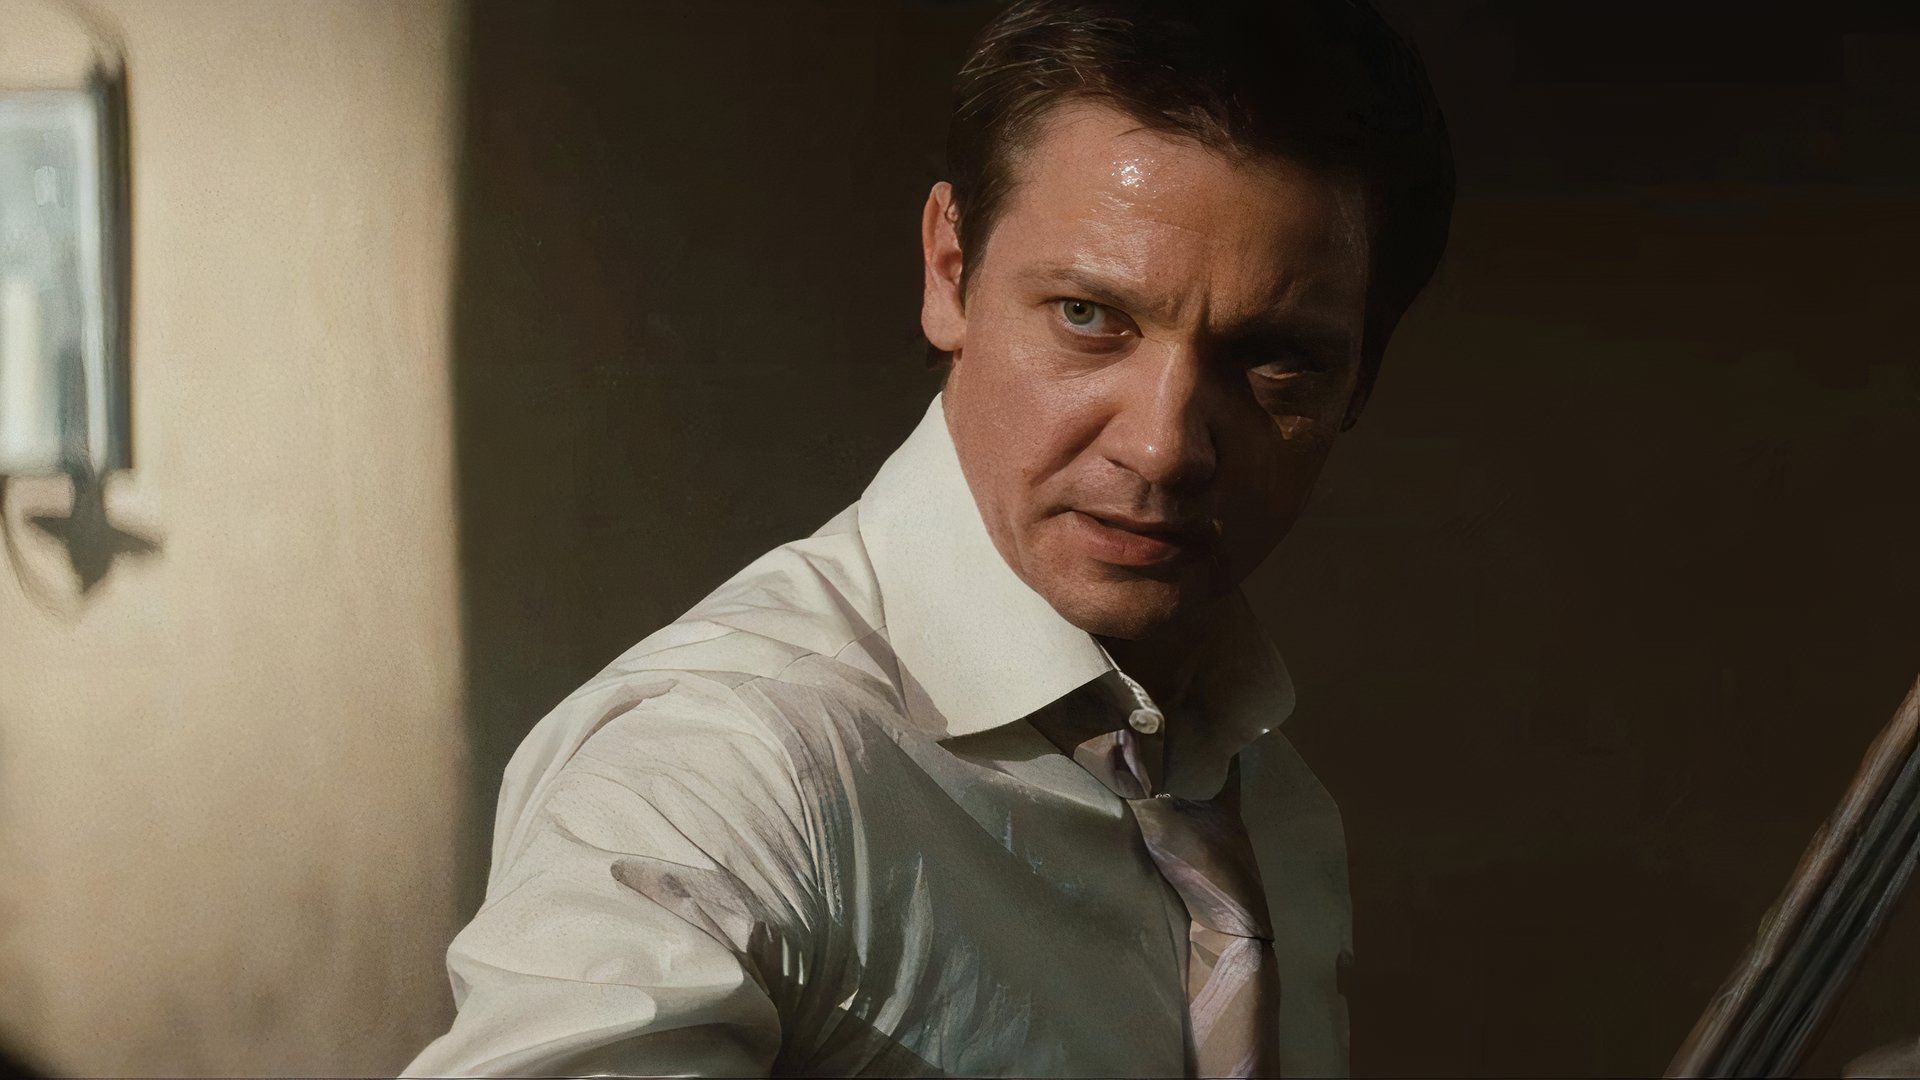 Jeremy Renner's William Brandt is ready to fight in Mission: Impossible